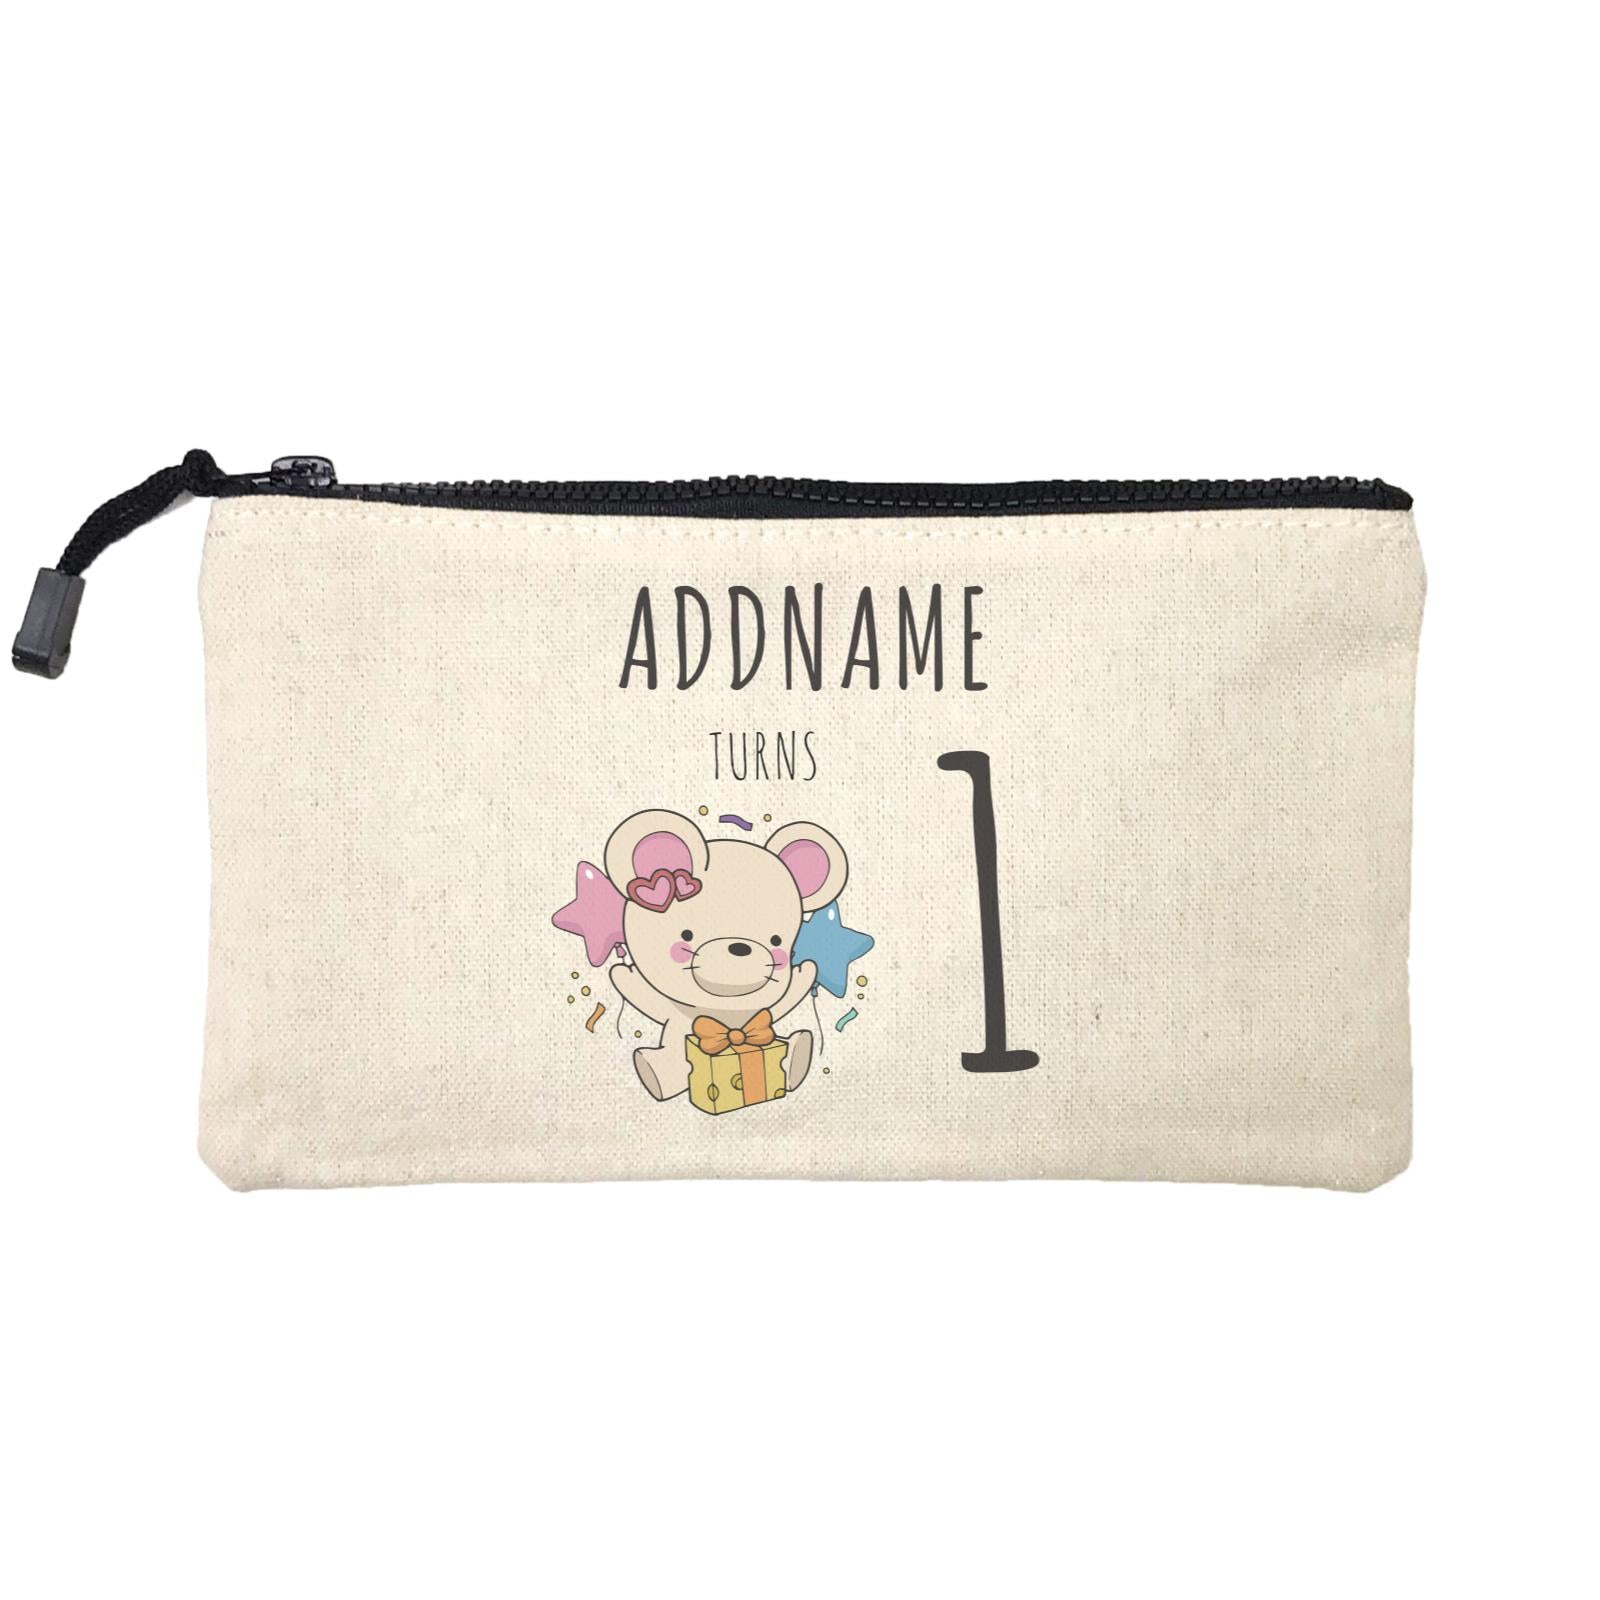 Birthday Sketch Animals Mouse with Cheese Present Addname Turns 1 Mini Accessories Stationery Pouch